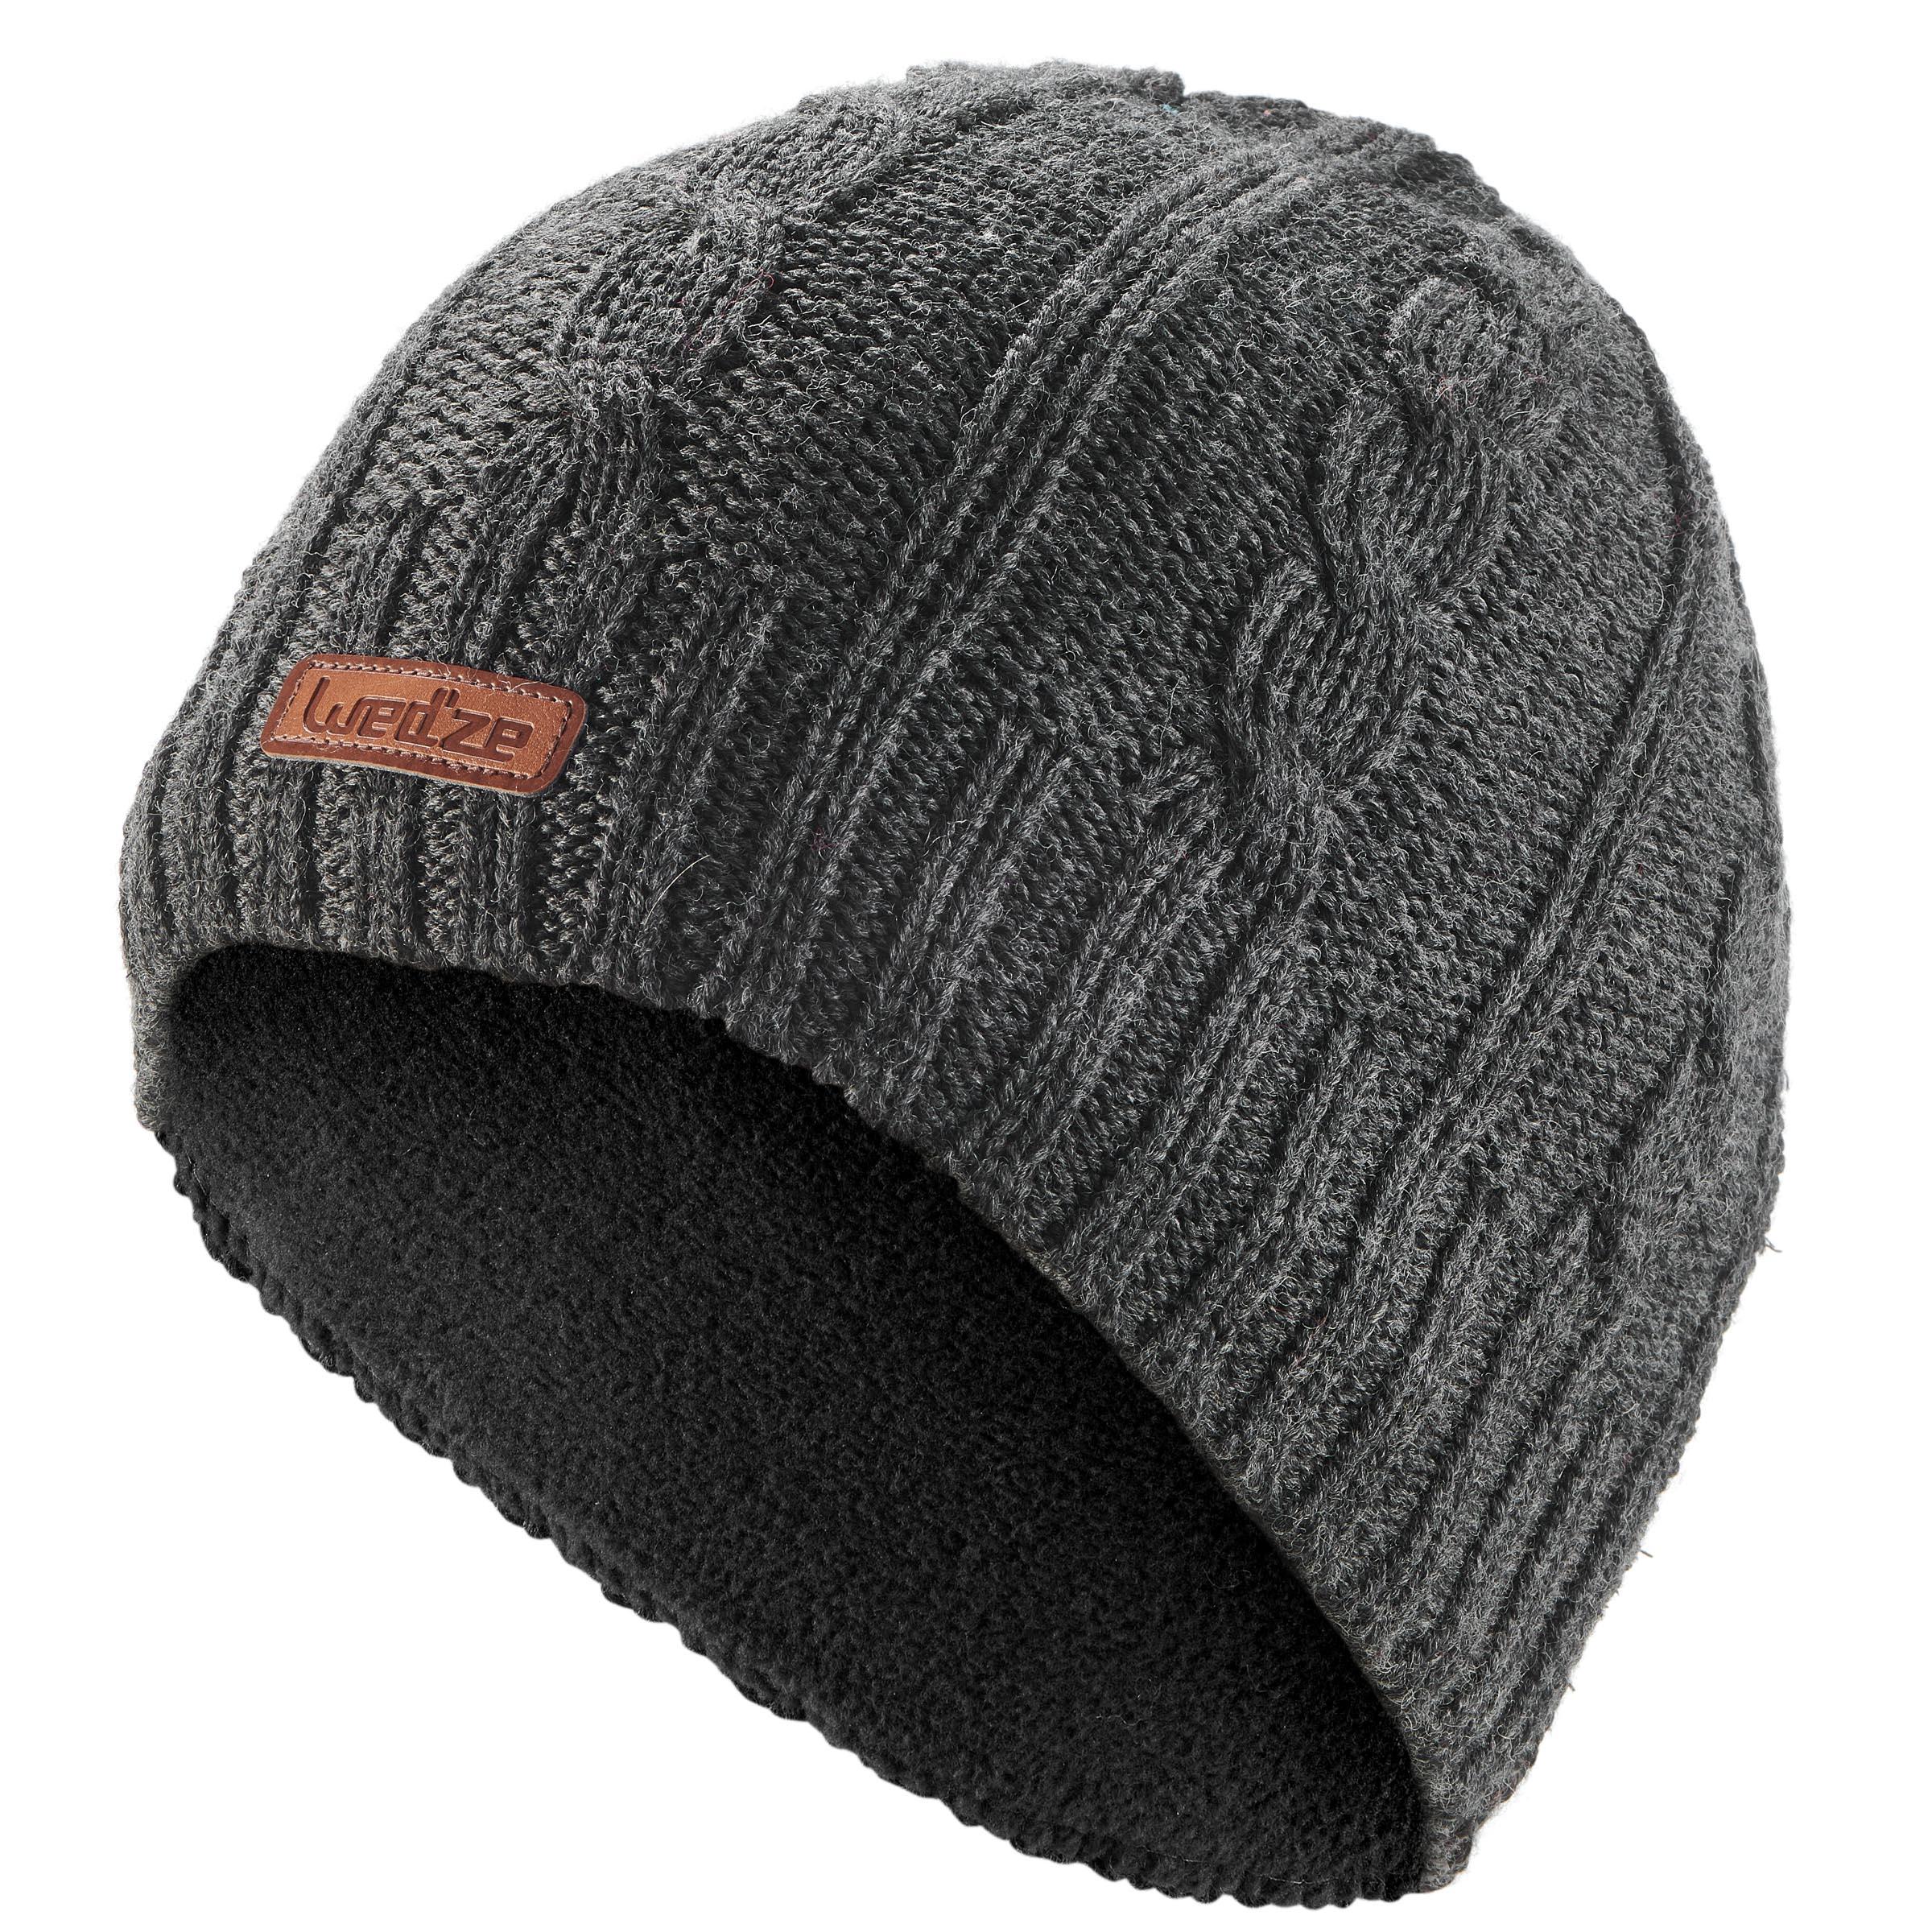 ADULT CABLE-KNIT WOOL SKI HAT GREY